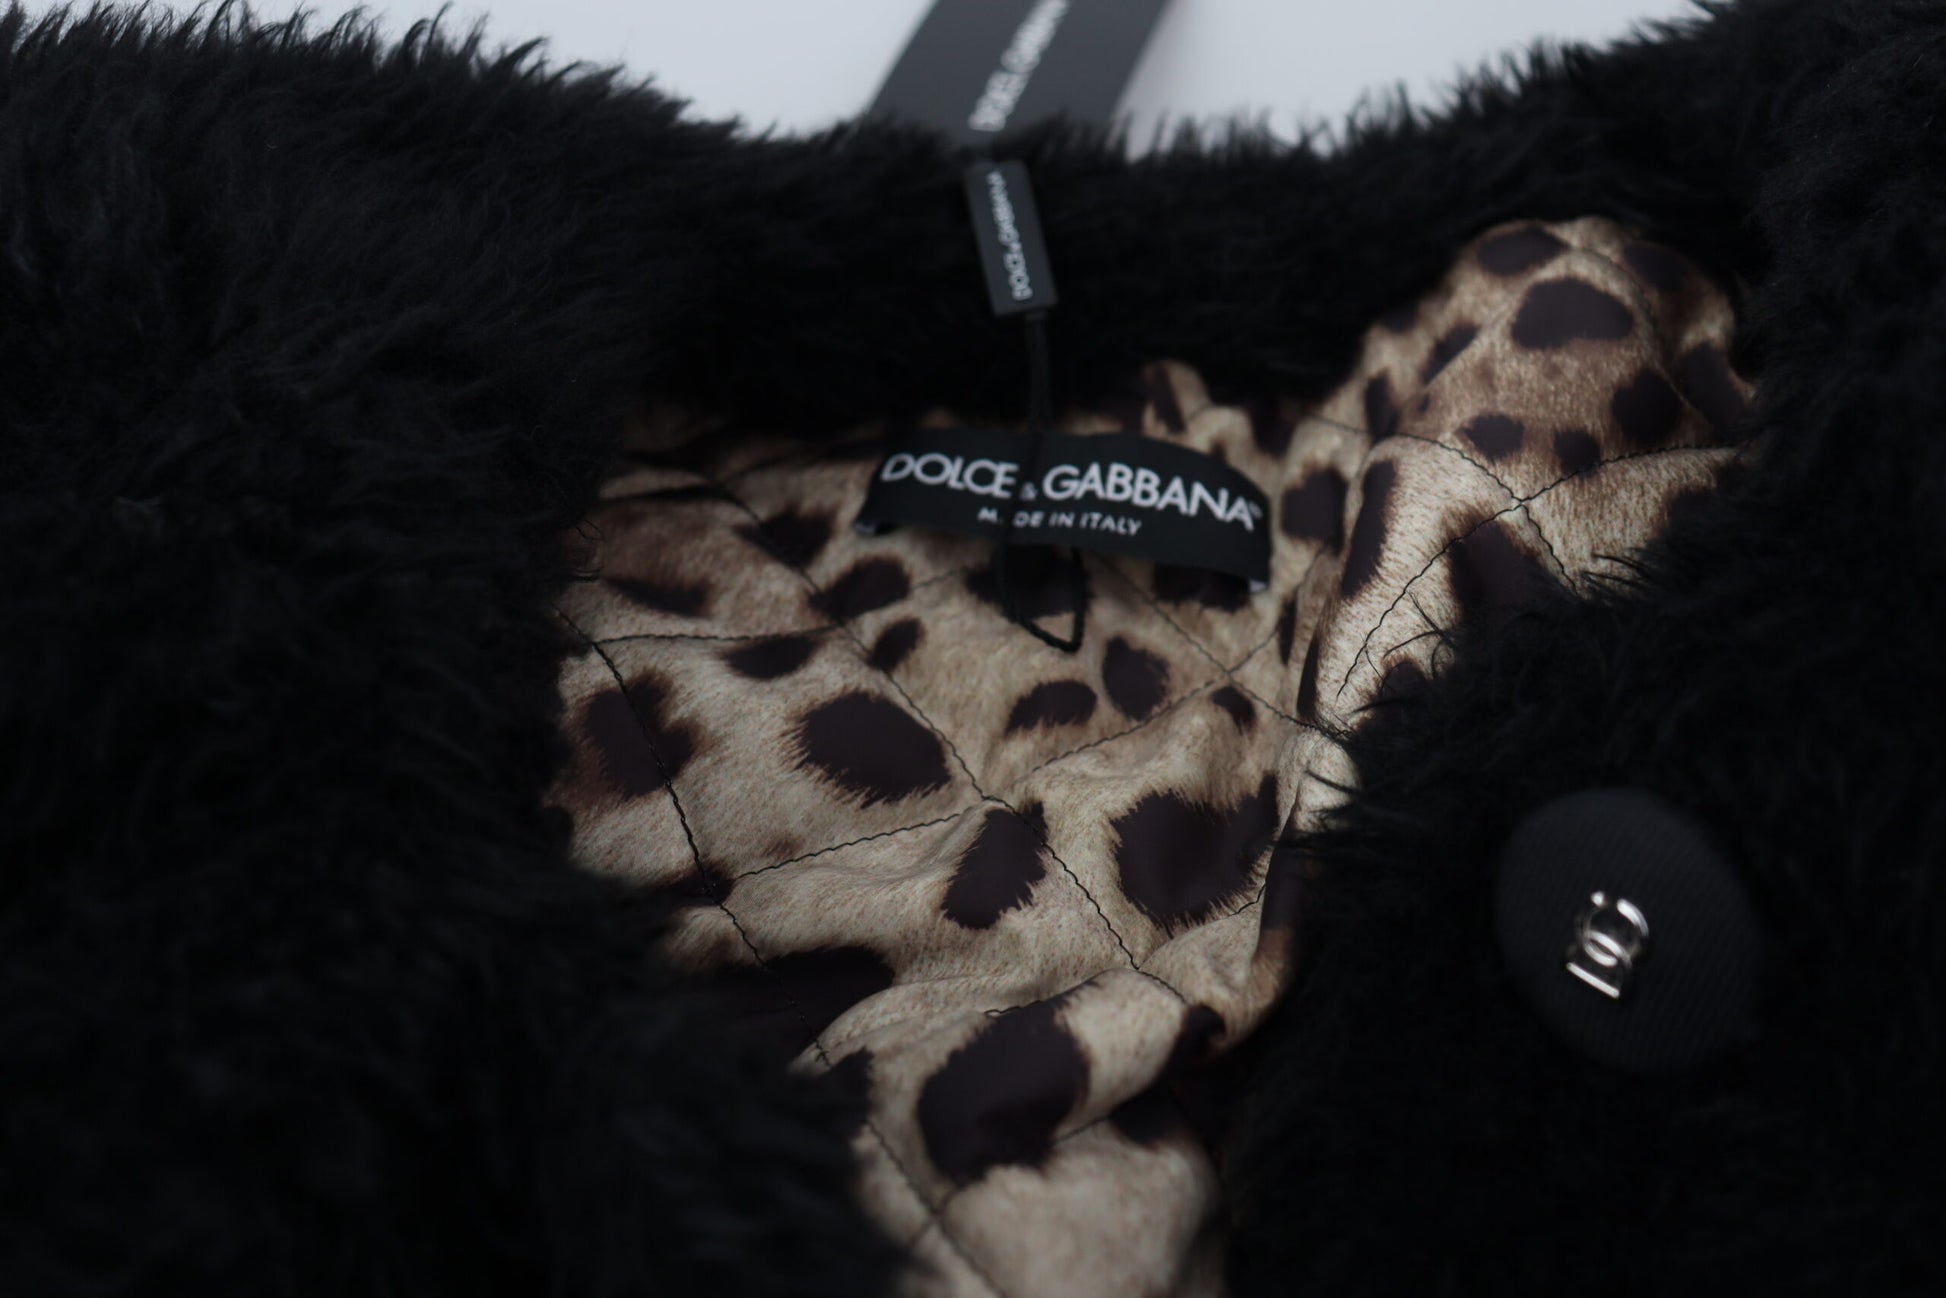 Dolce & Gabbana Black Cashmere Blend Faux Fur Coat Jacket - Designed by Dolce & Gabbana Available to Buy at a Discounted Price on Moon Behind The Hill Online Designer Discount Store